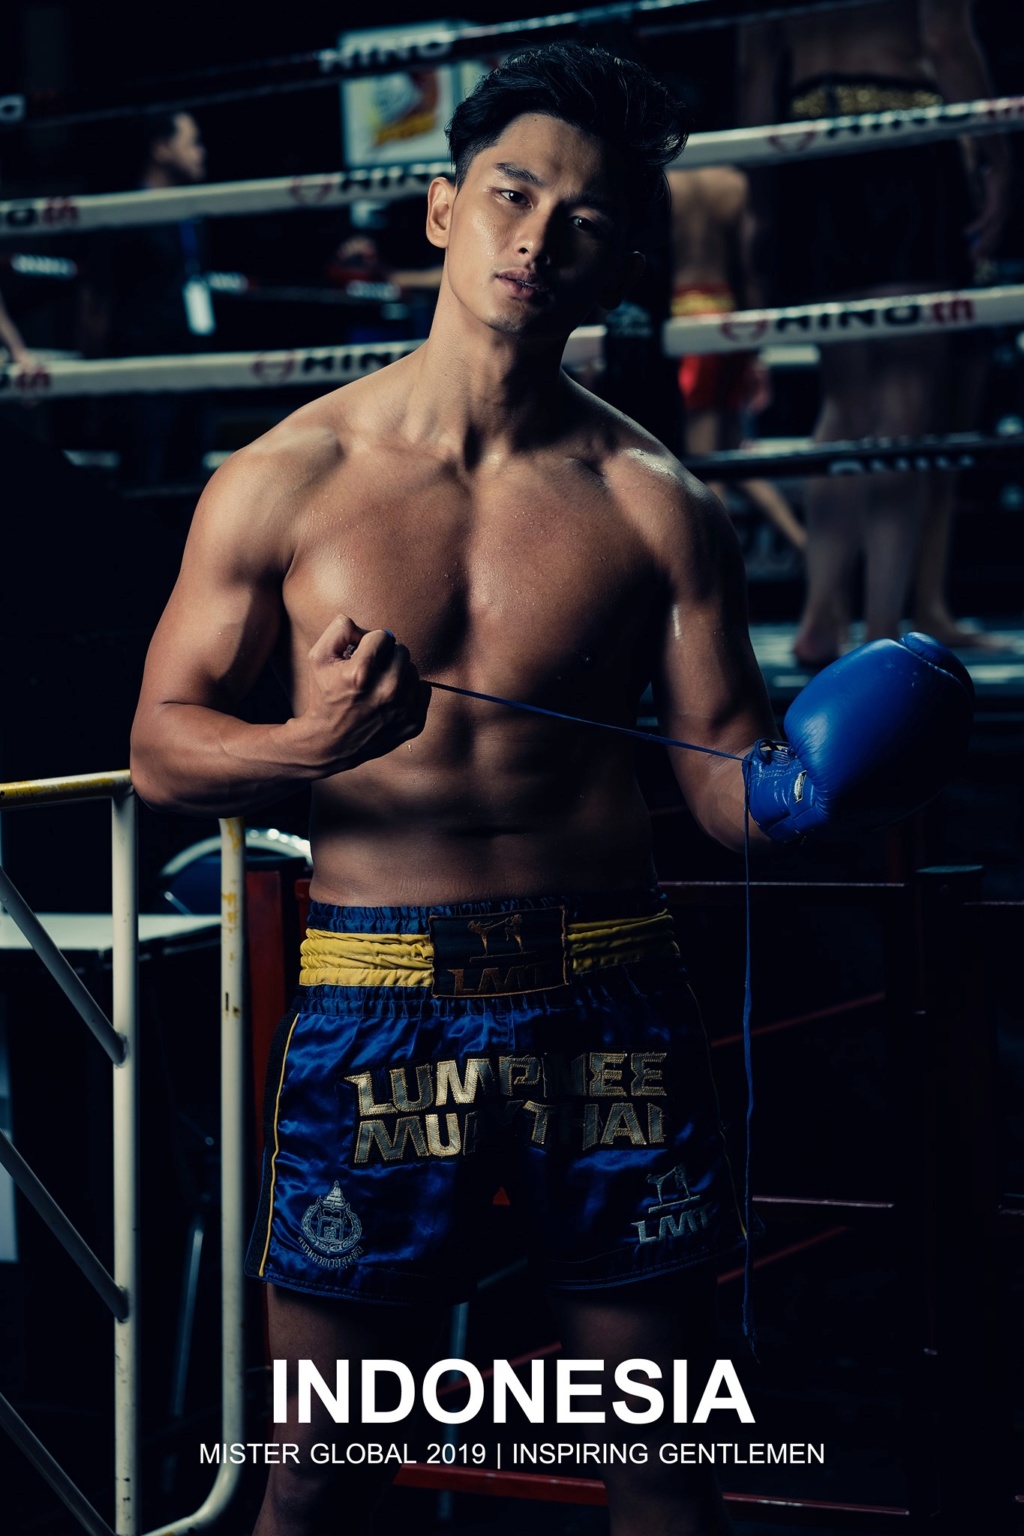 2019 Mister Global contestants in Thai boxing costumes 70326510